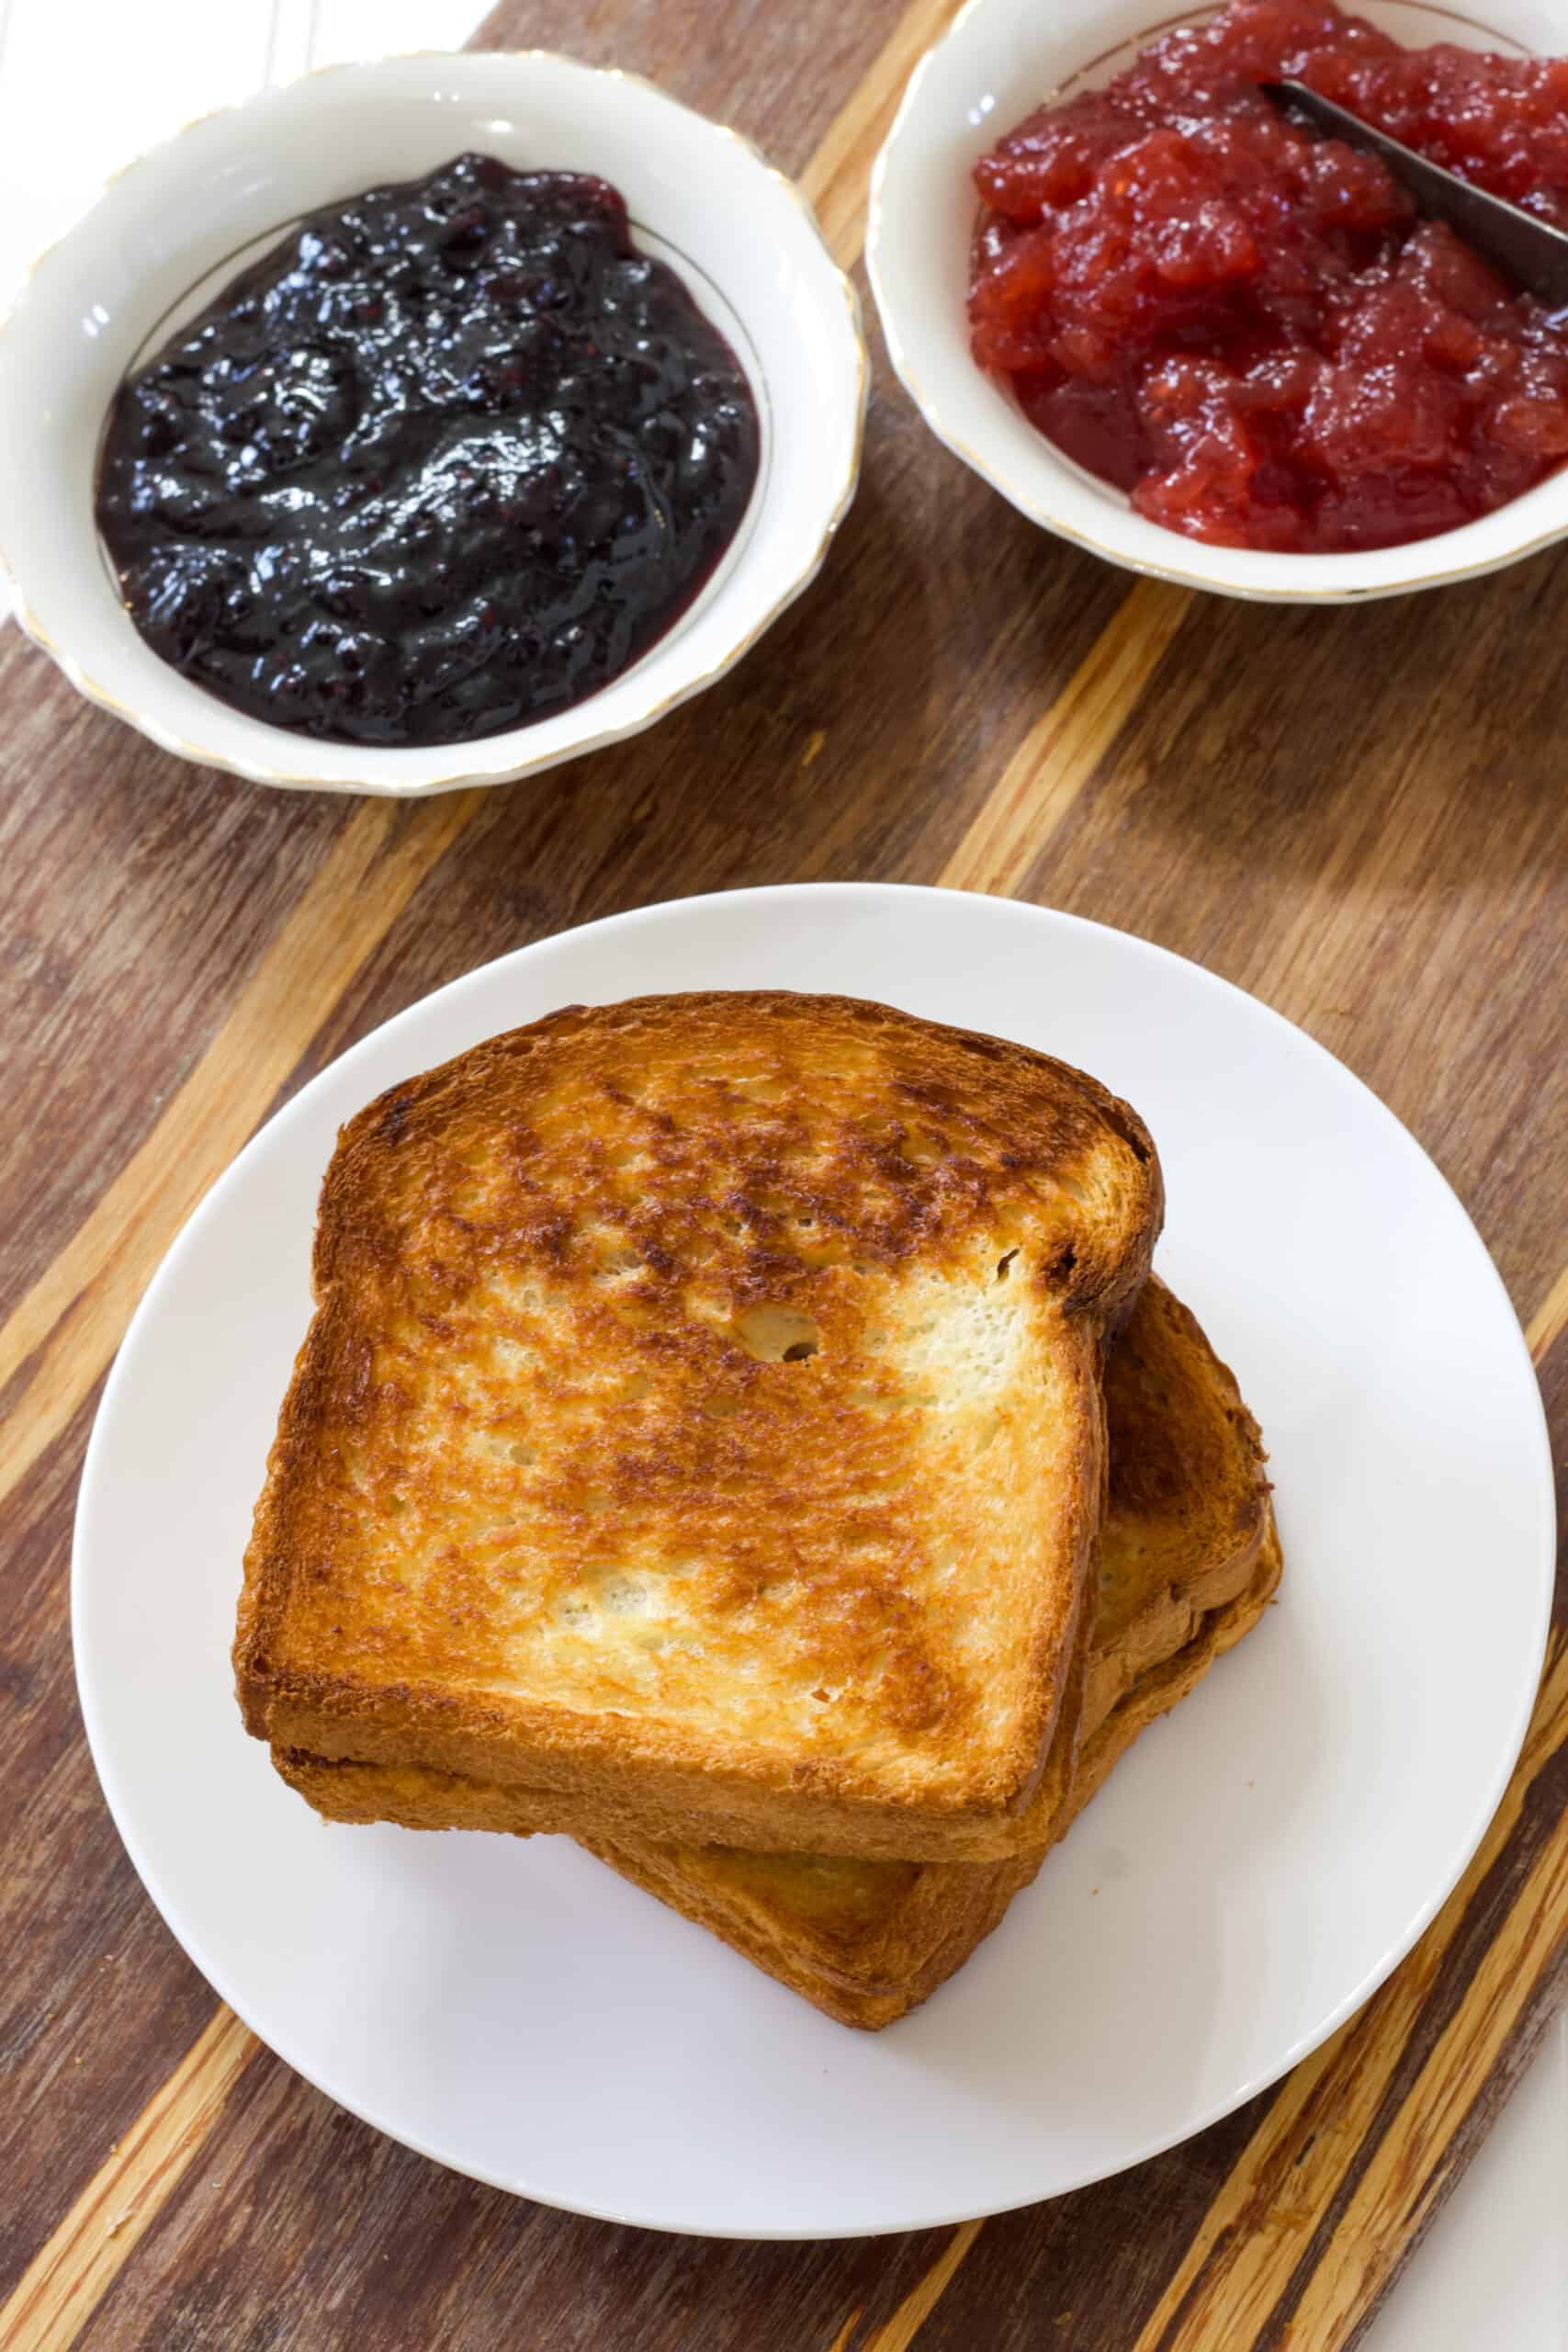 Two whole air fried pb & j sandwiches on a white plate with two small bowls of jelly in the background.